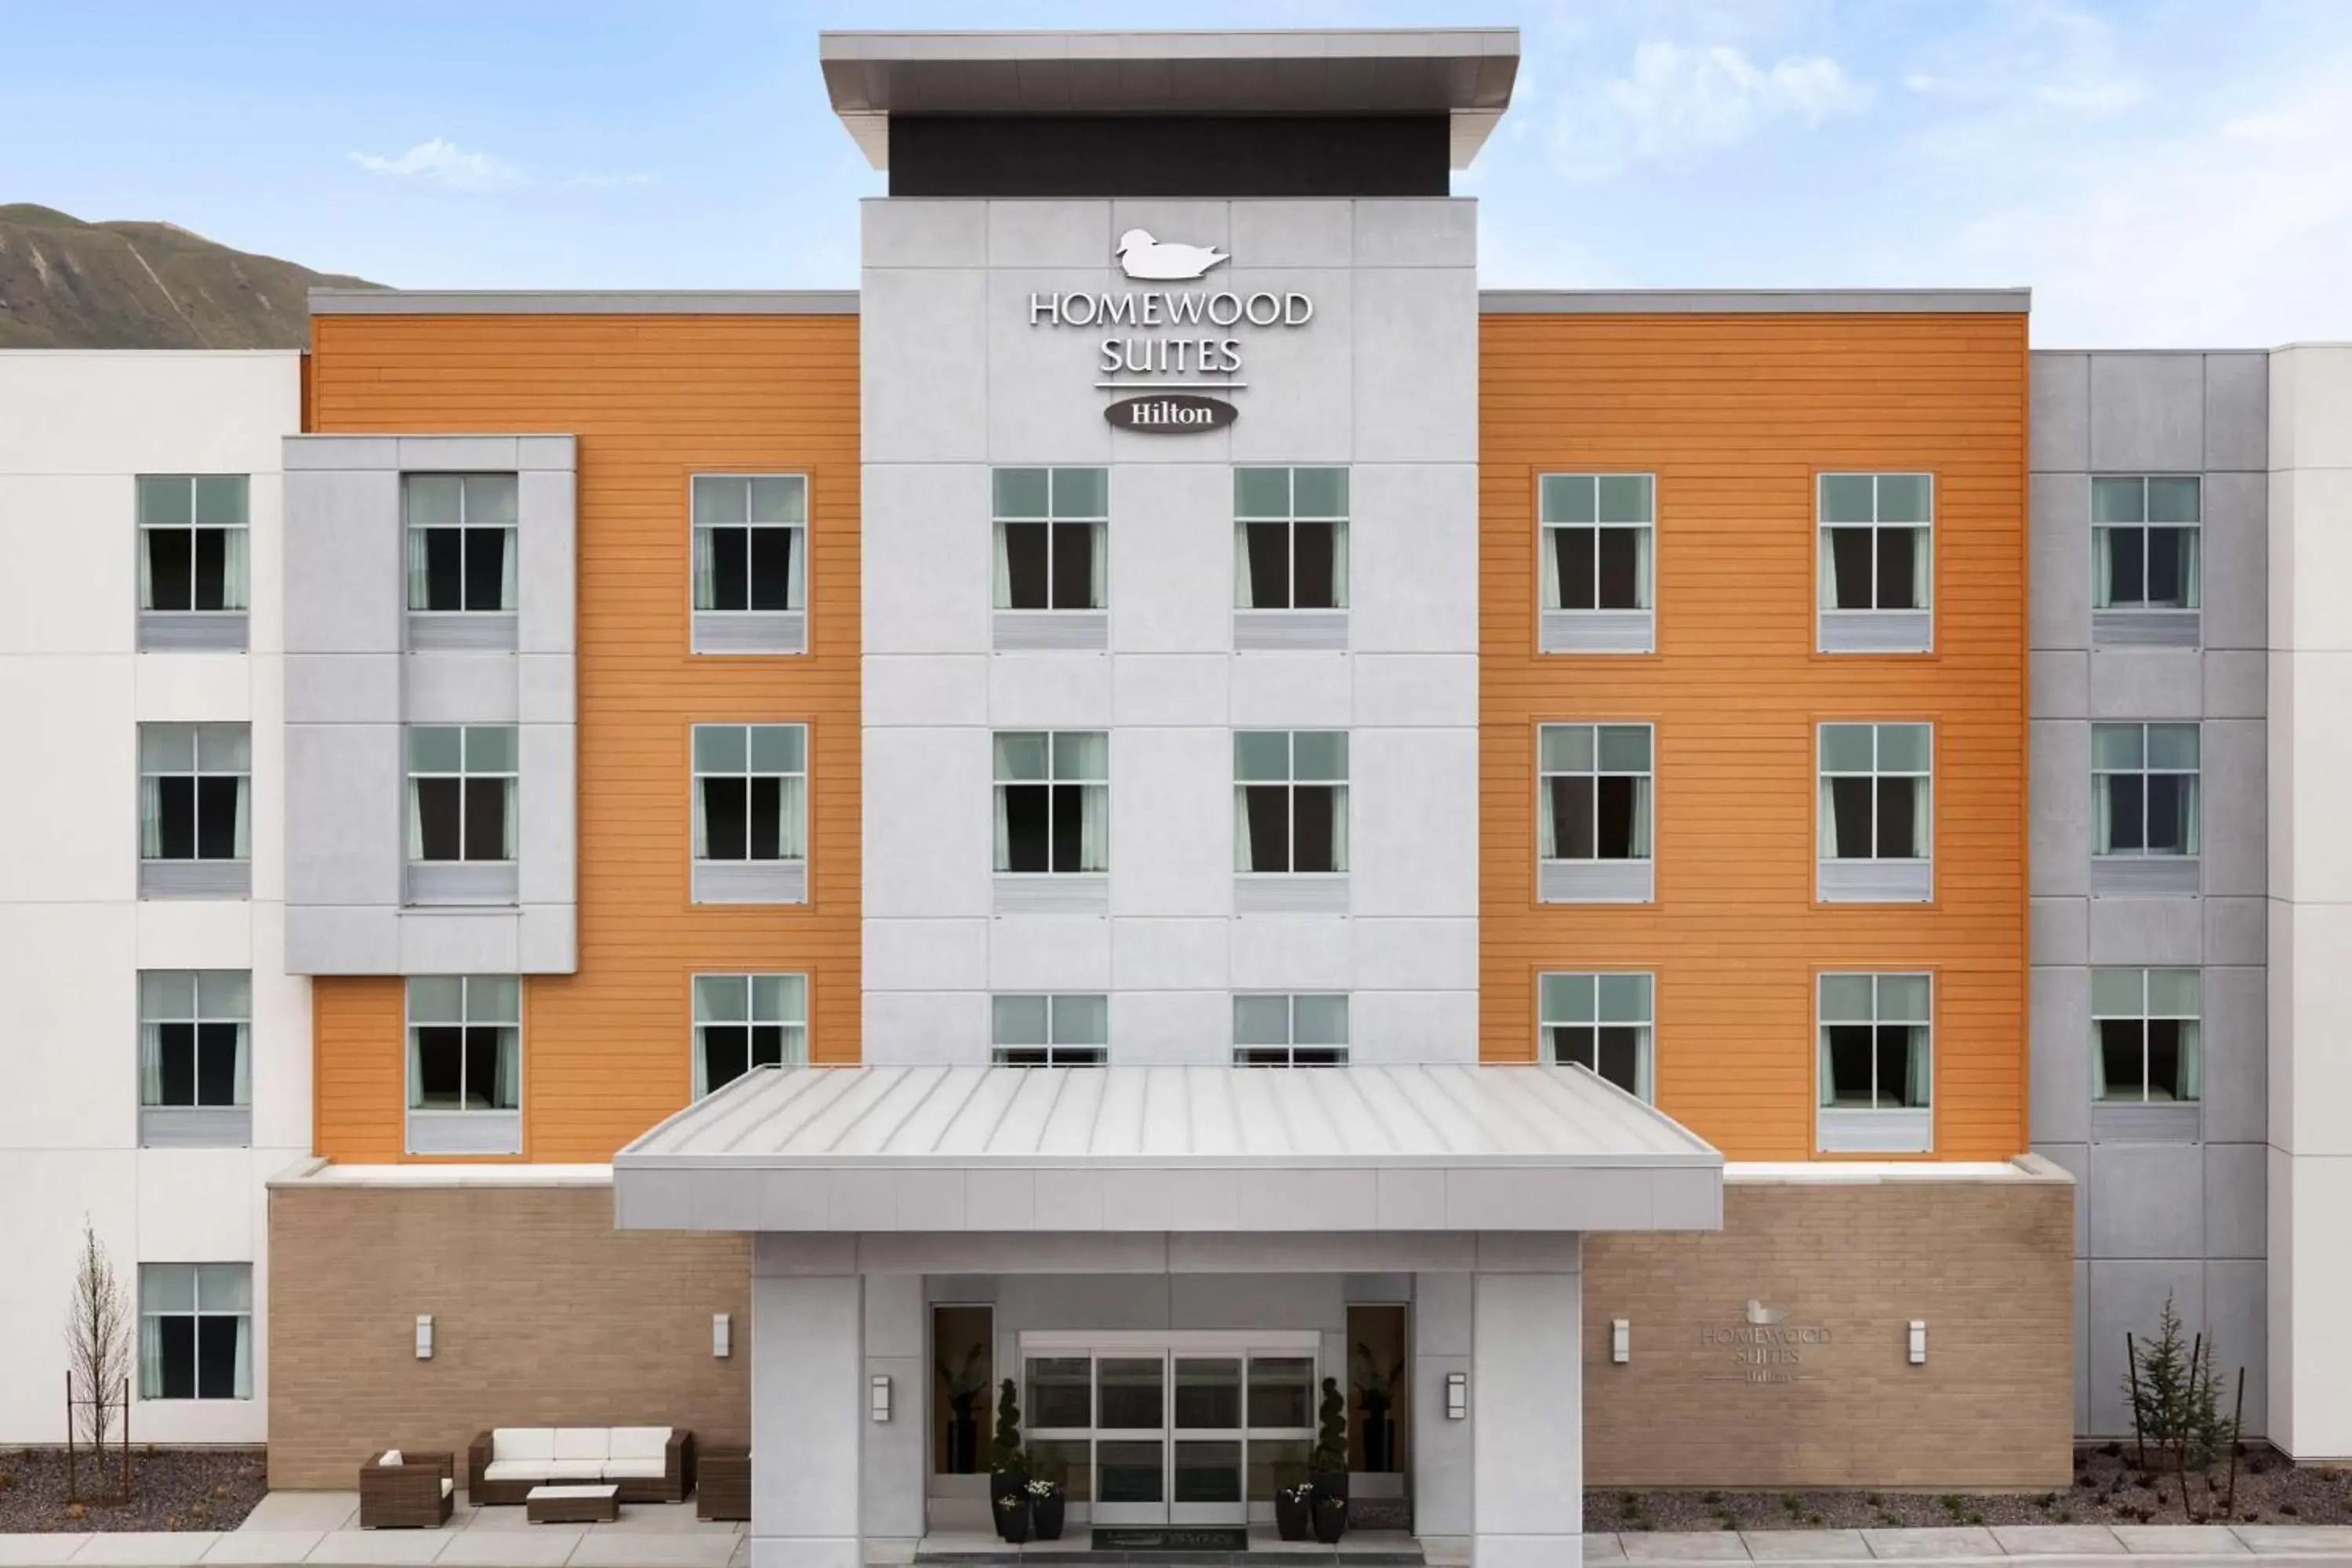 Property Building in Homewood Suites By Hilton SLC/Draper